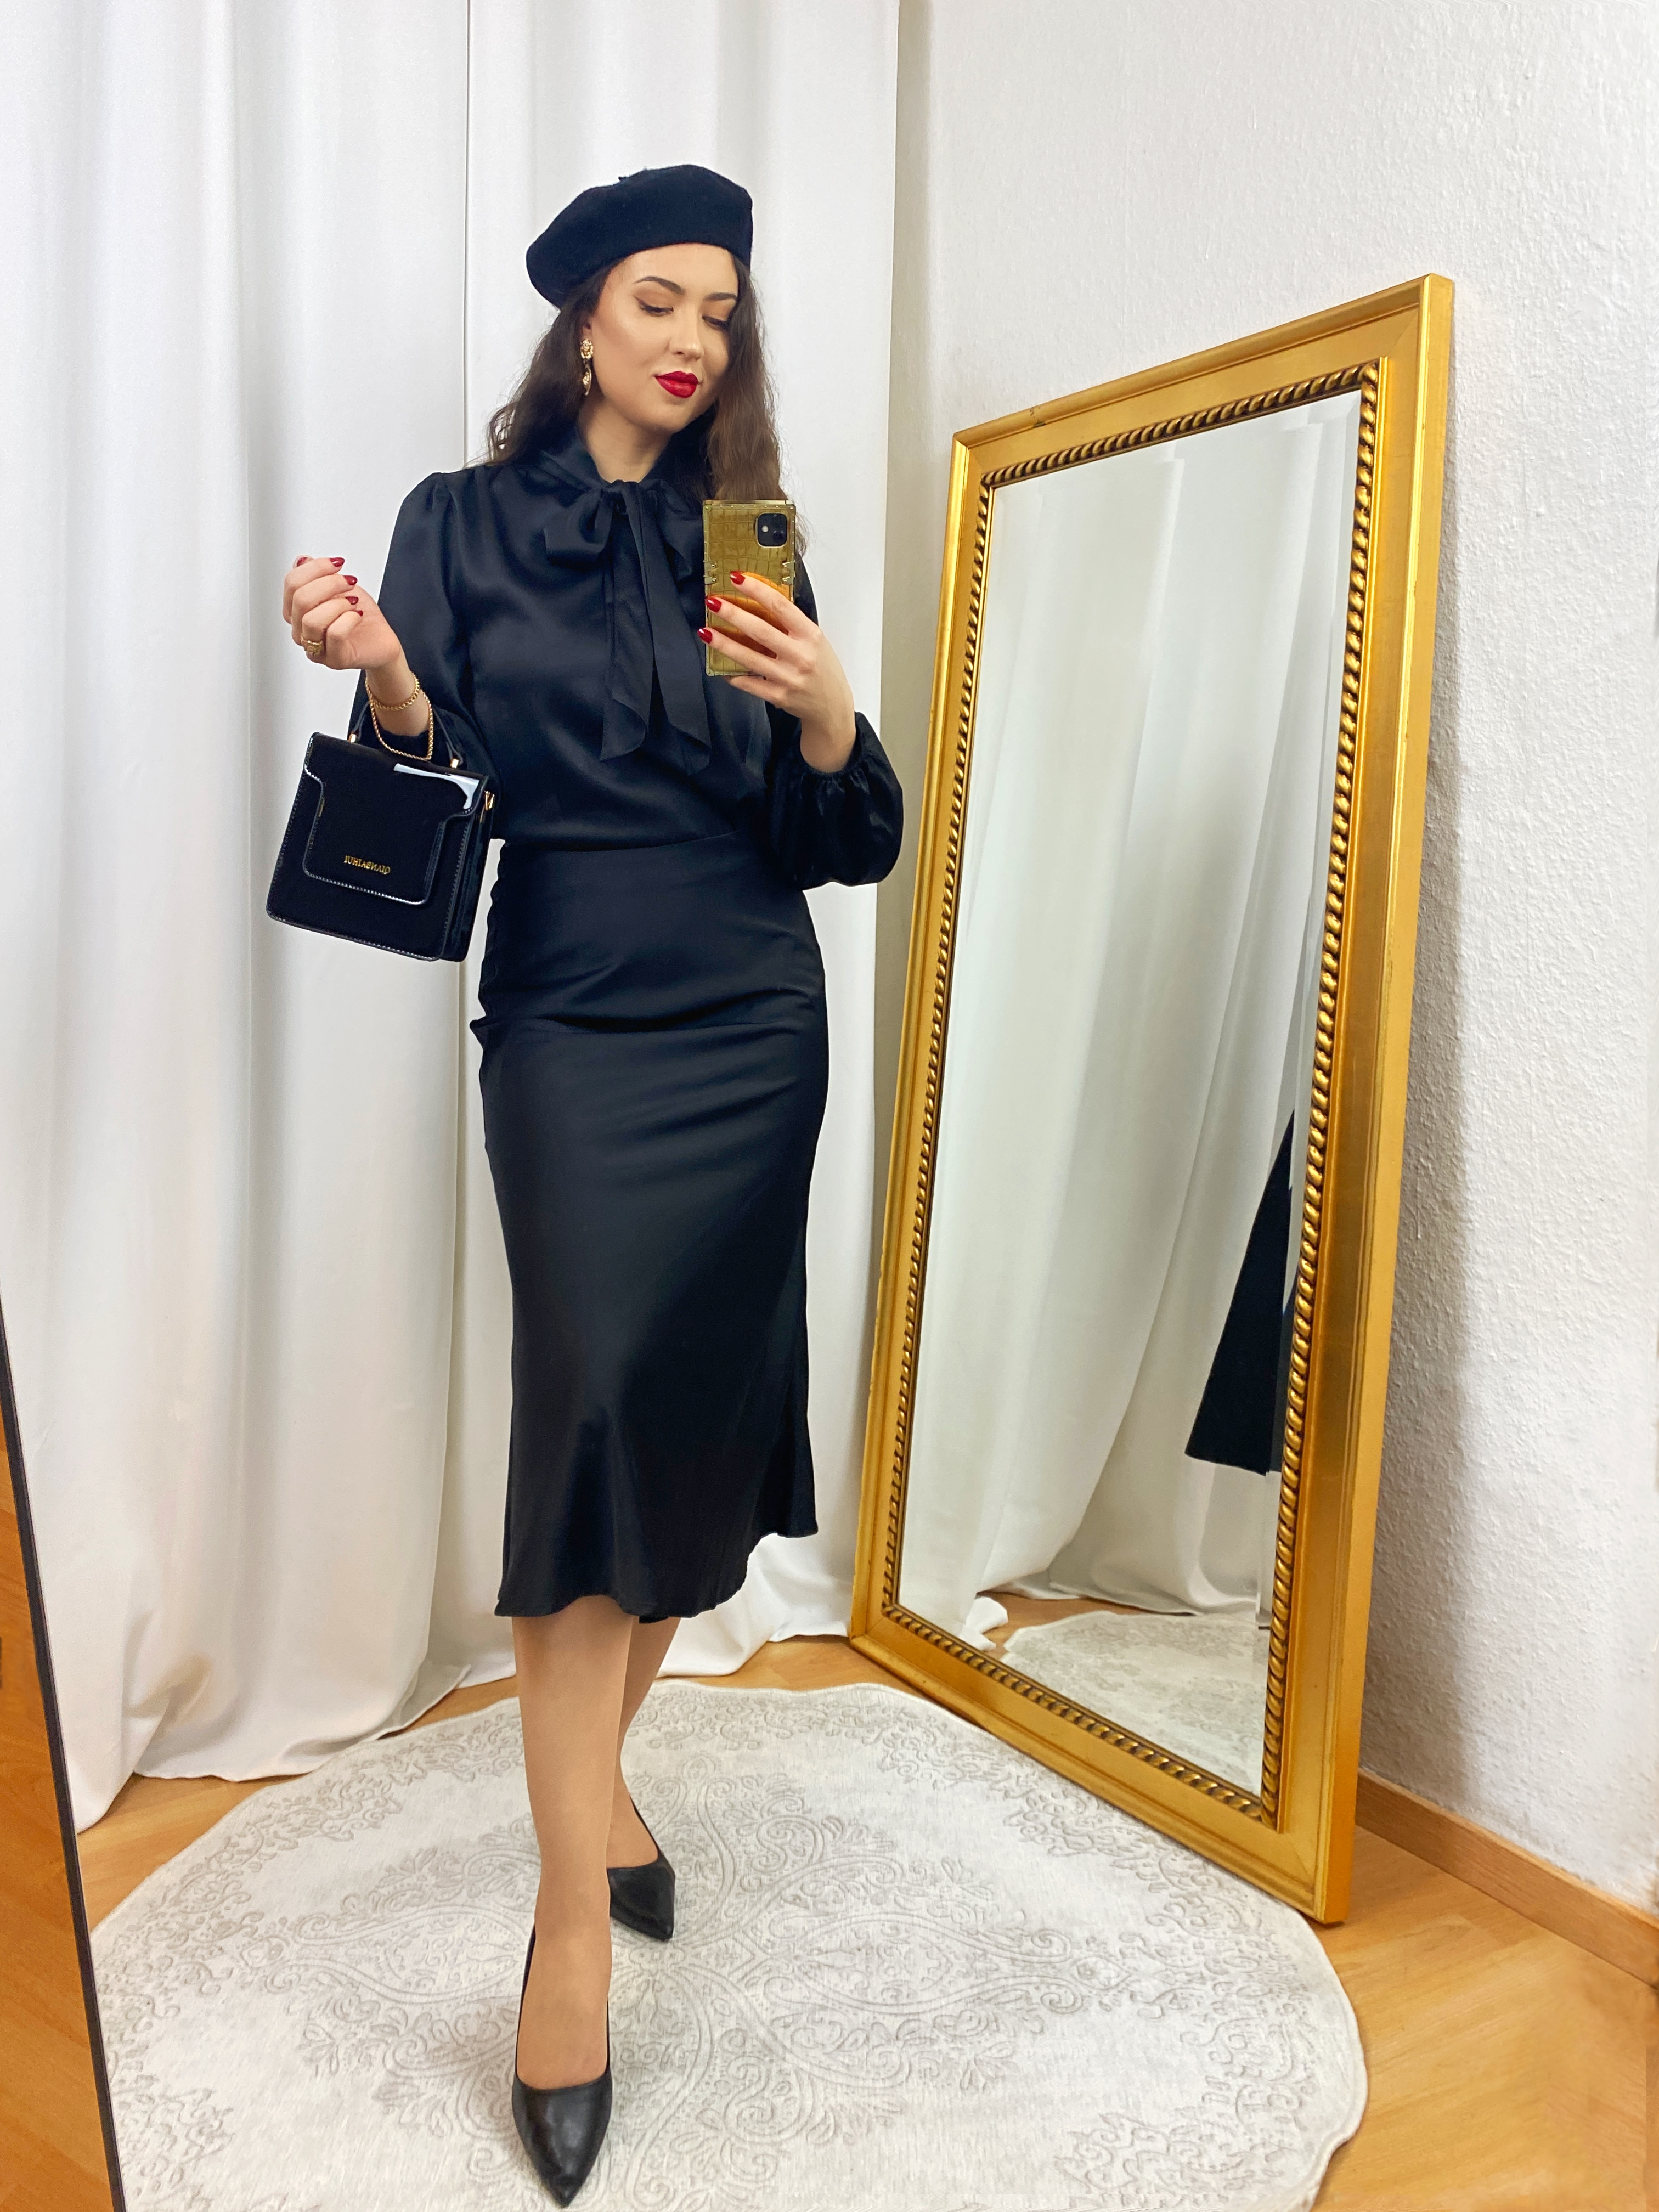 Black Satin Tie Blouse and Satin Skirt Outfit (French Style)